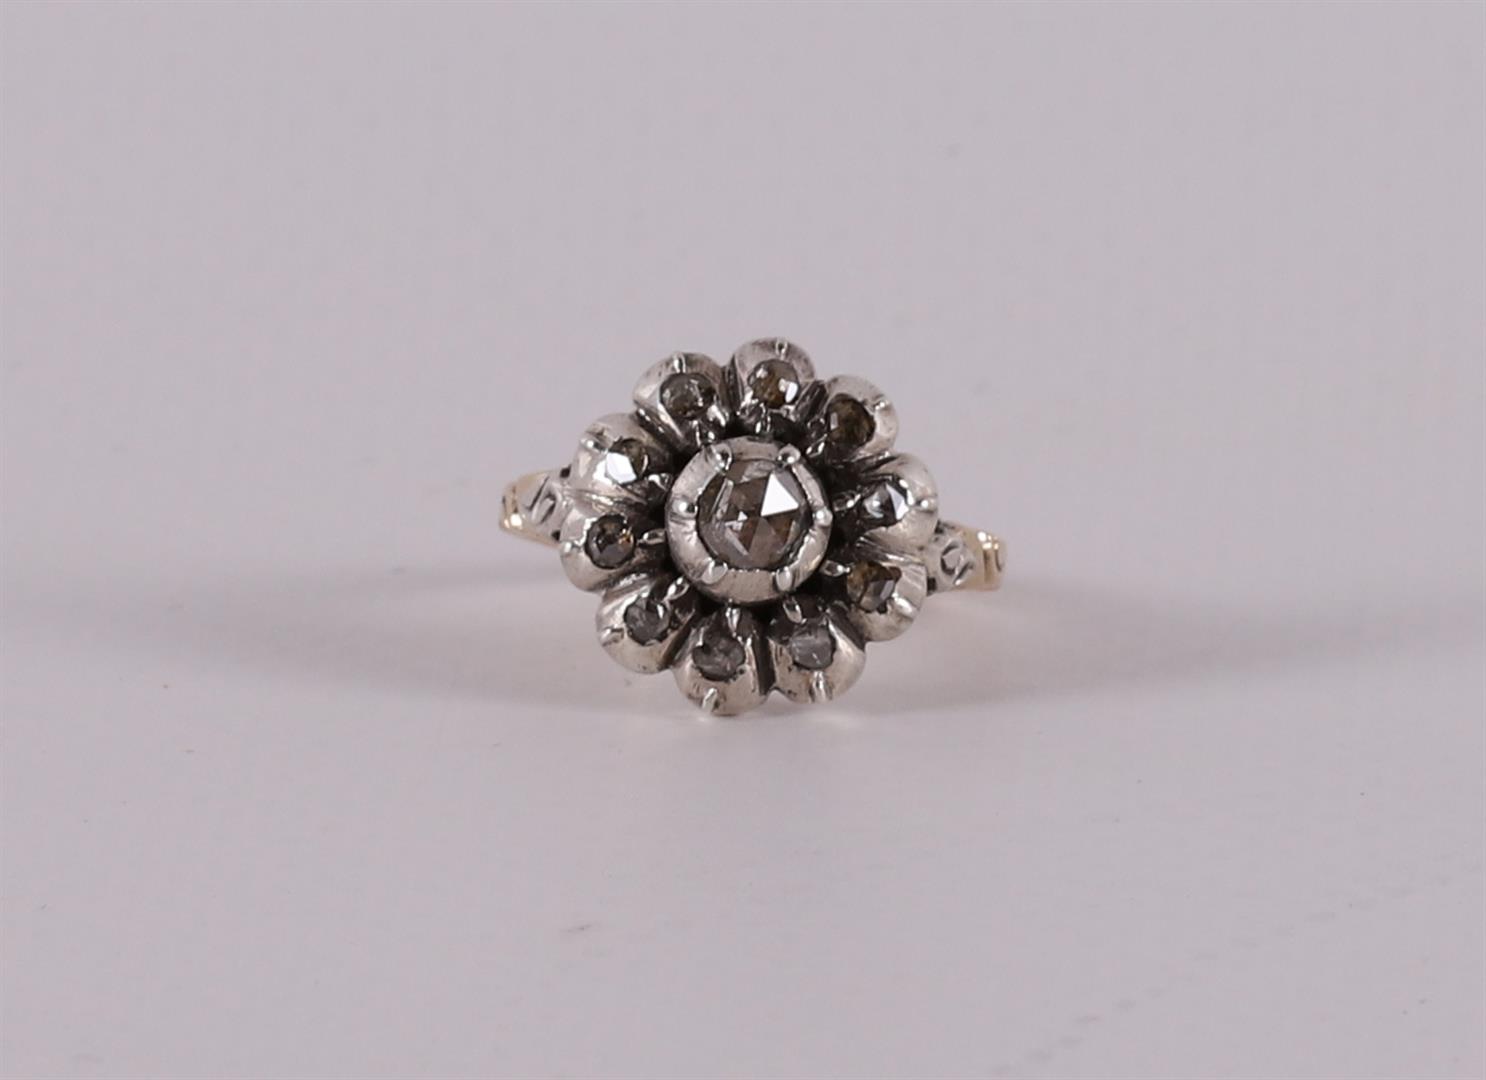 A 14 carat 585/1000 gold ring with rose cut diamonds set in silver. Ring size 17.25 mm.